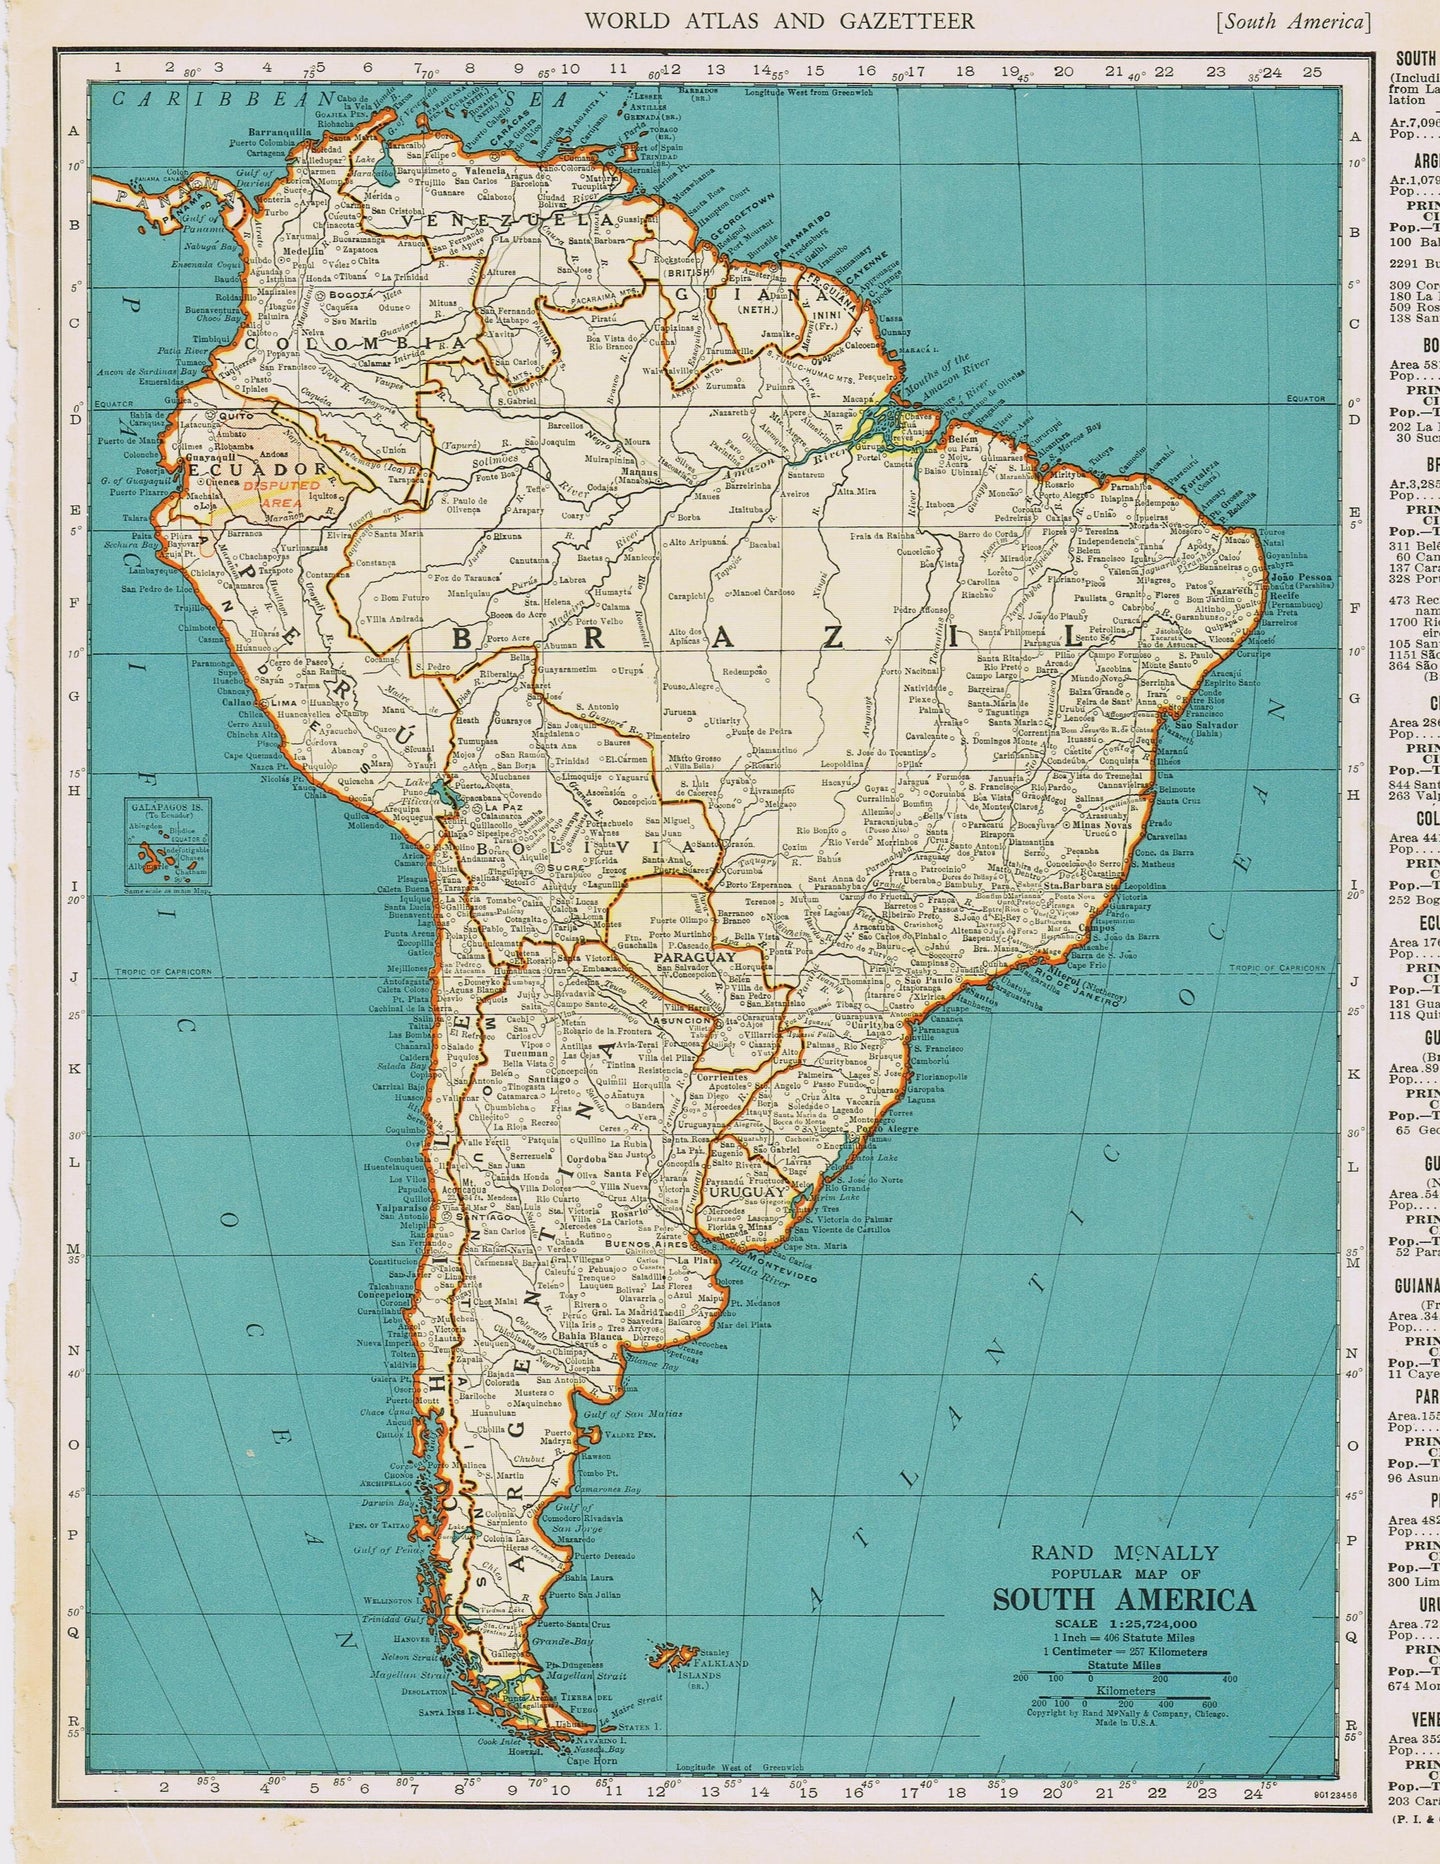 Genuine-Antique-Map-Popular-Map-of-South-America--1940-Rand-McNally-Maps-Of-Antiquity